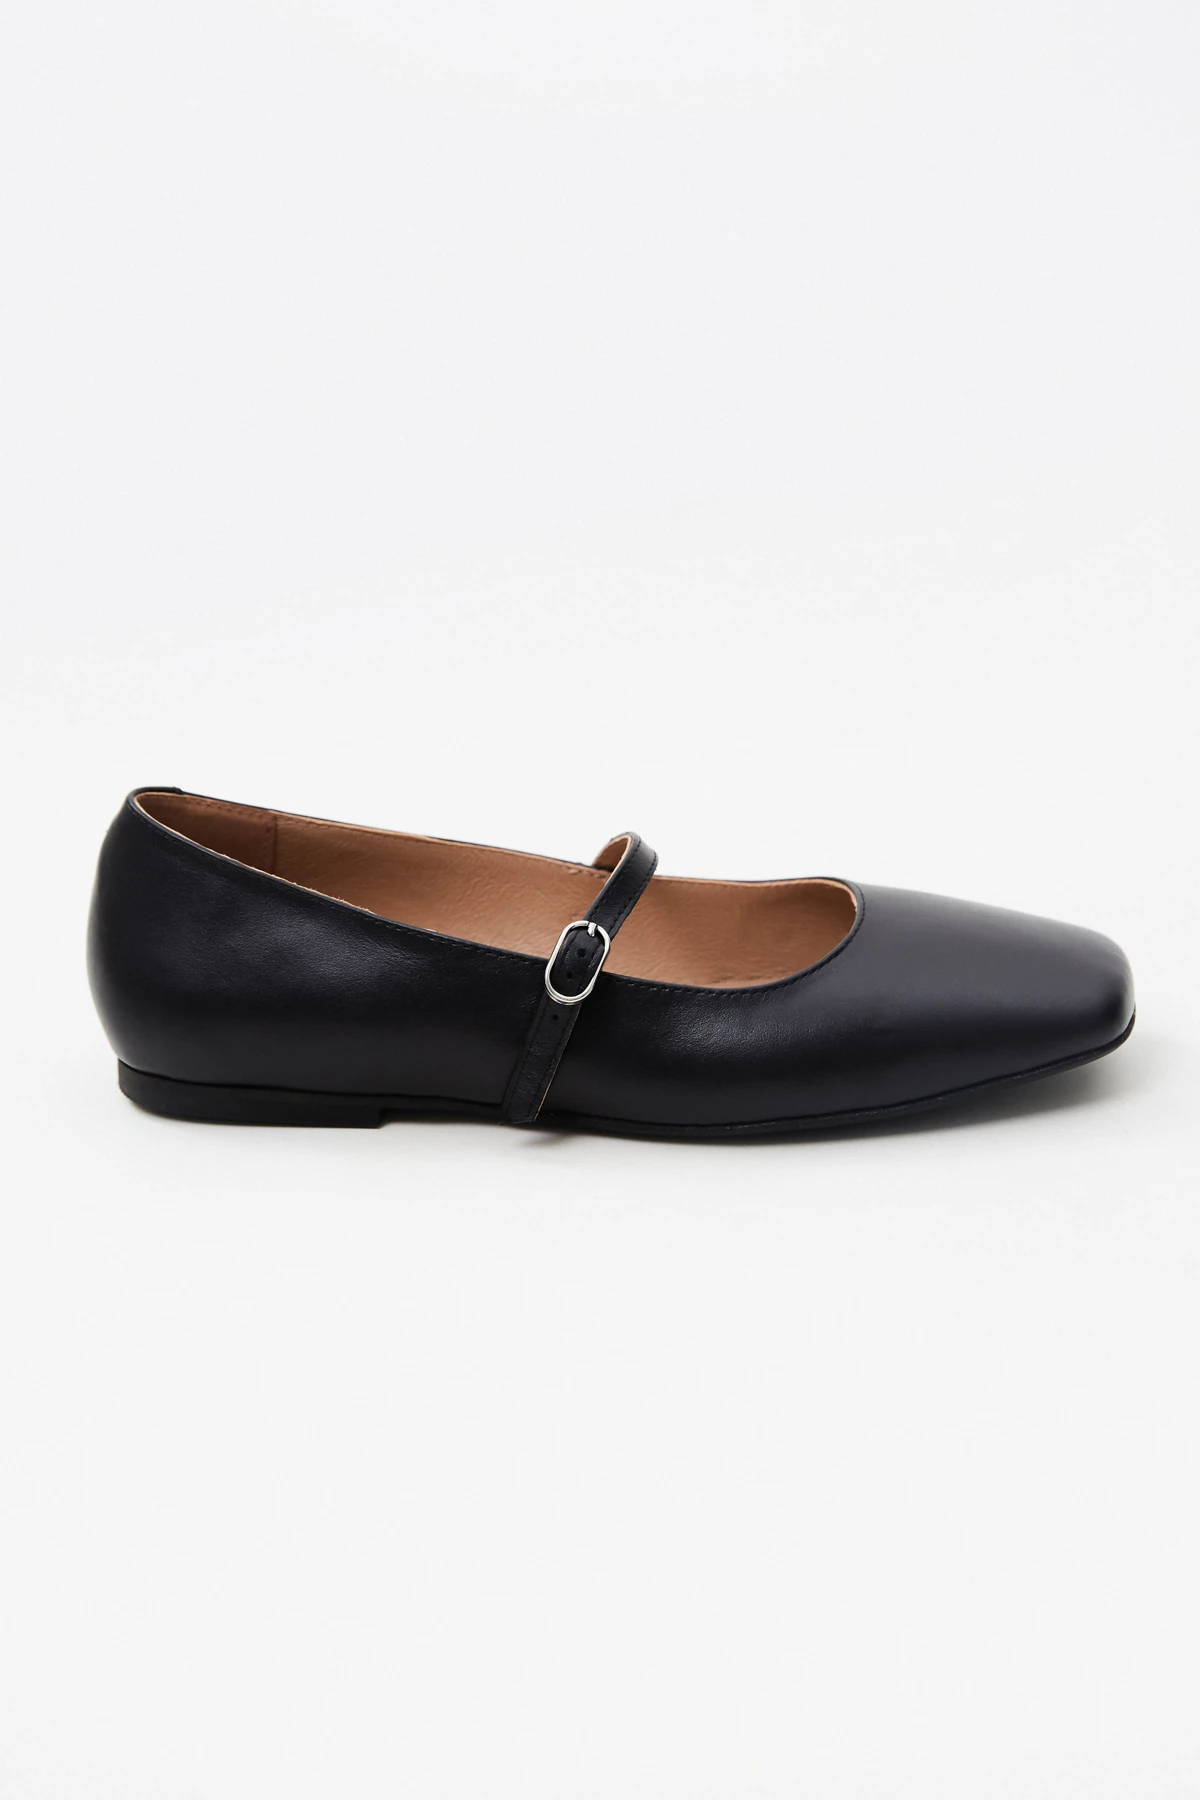 Black Mary Jane ballet flats made of genuine leather, photo 4